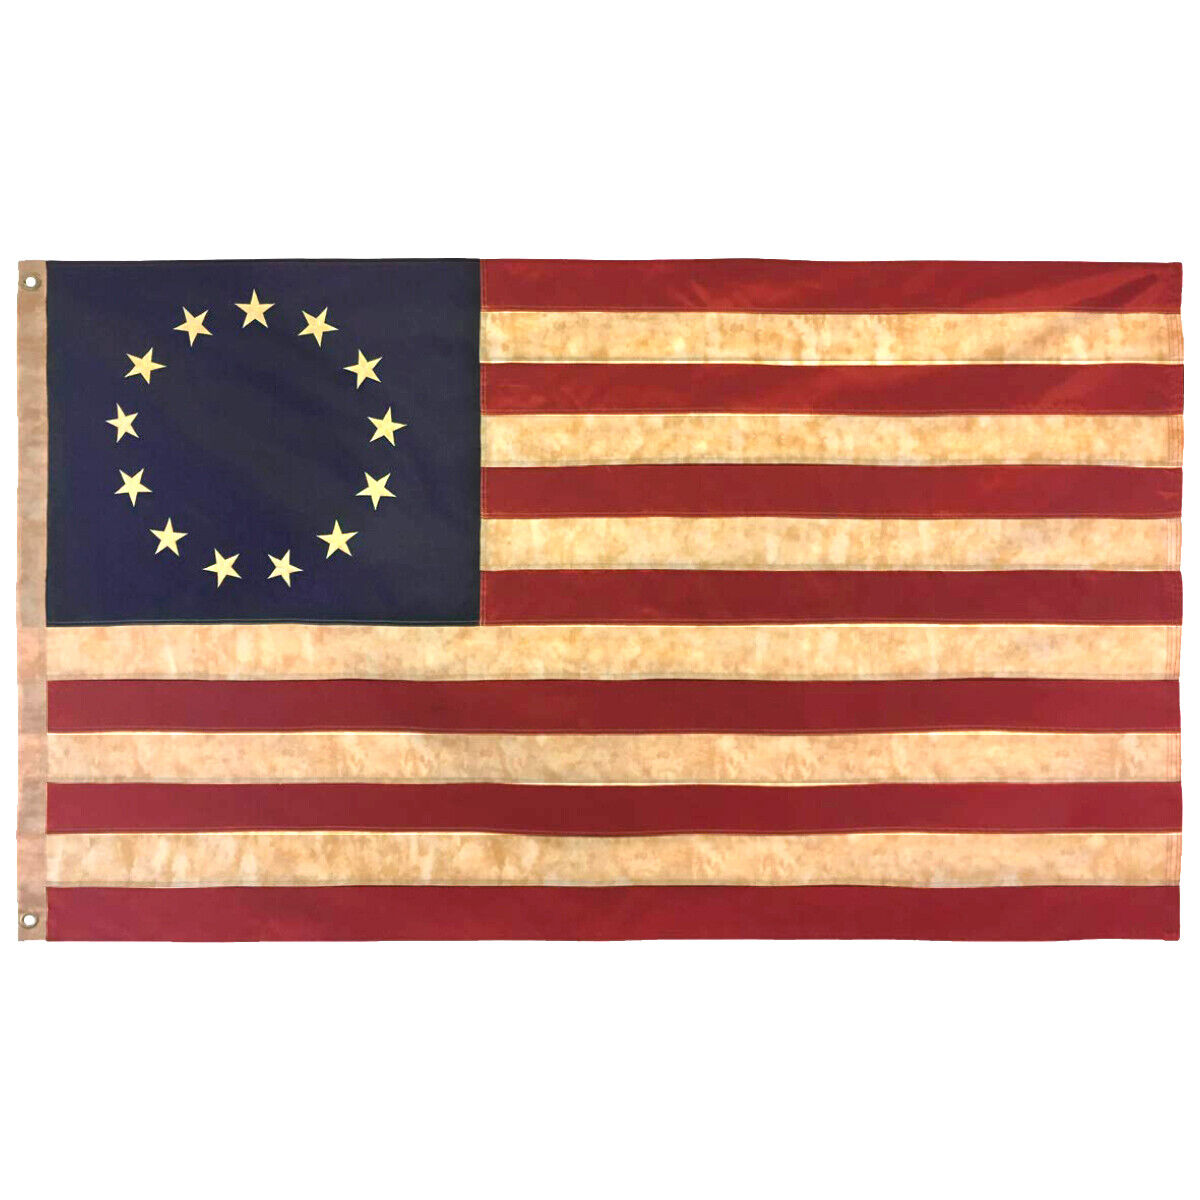 Morigins American Betsy Ross Flag Tea Stained 13 Star 3x5 FT Nylon Antique Look